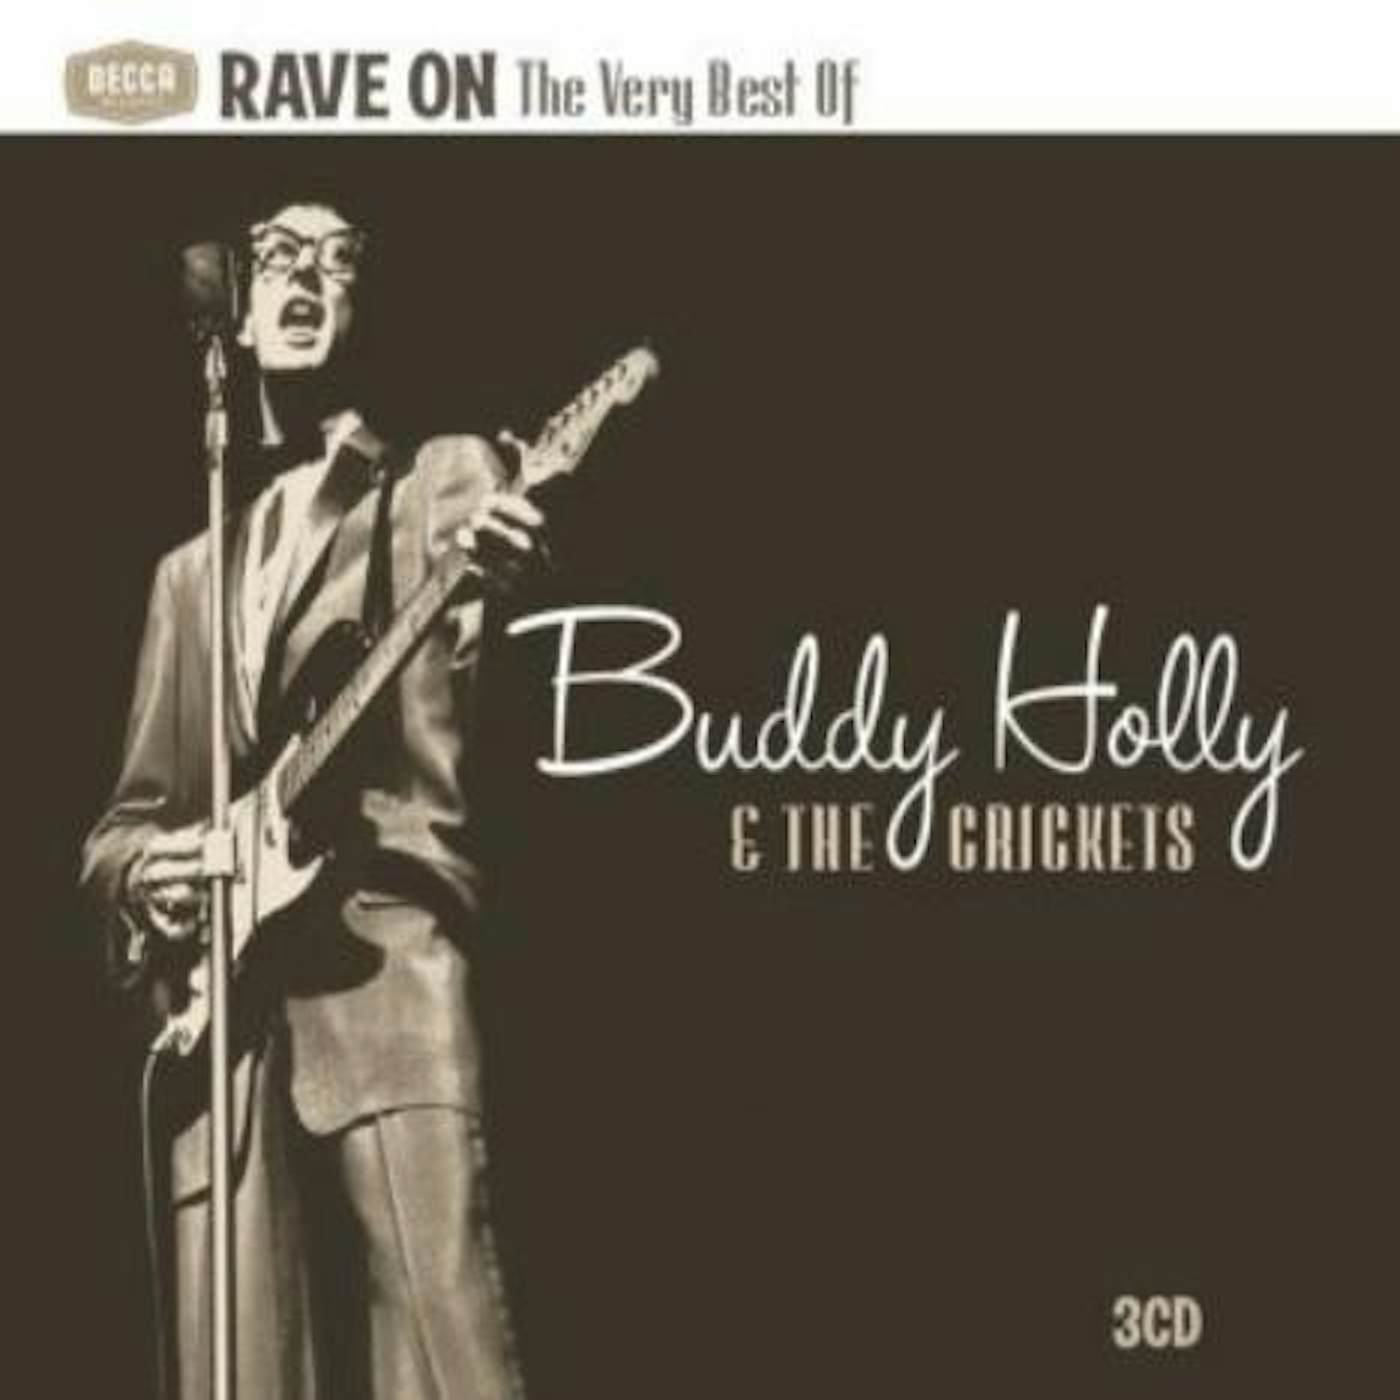 Buddy Holly & The Crickets RAVE ON: VERY BEST OF CD